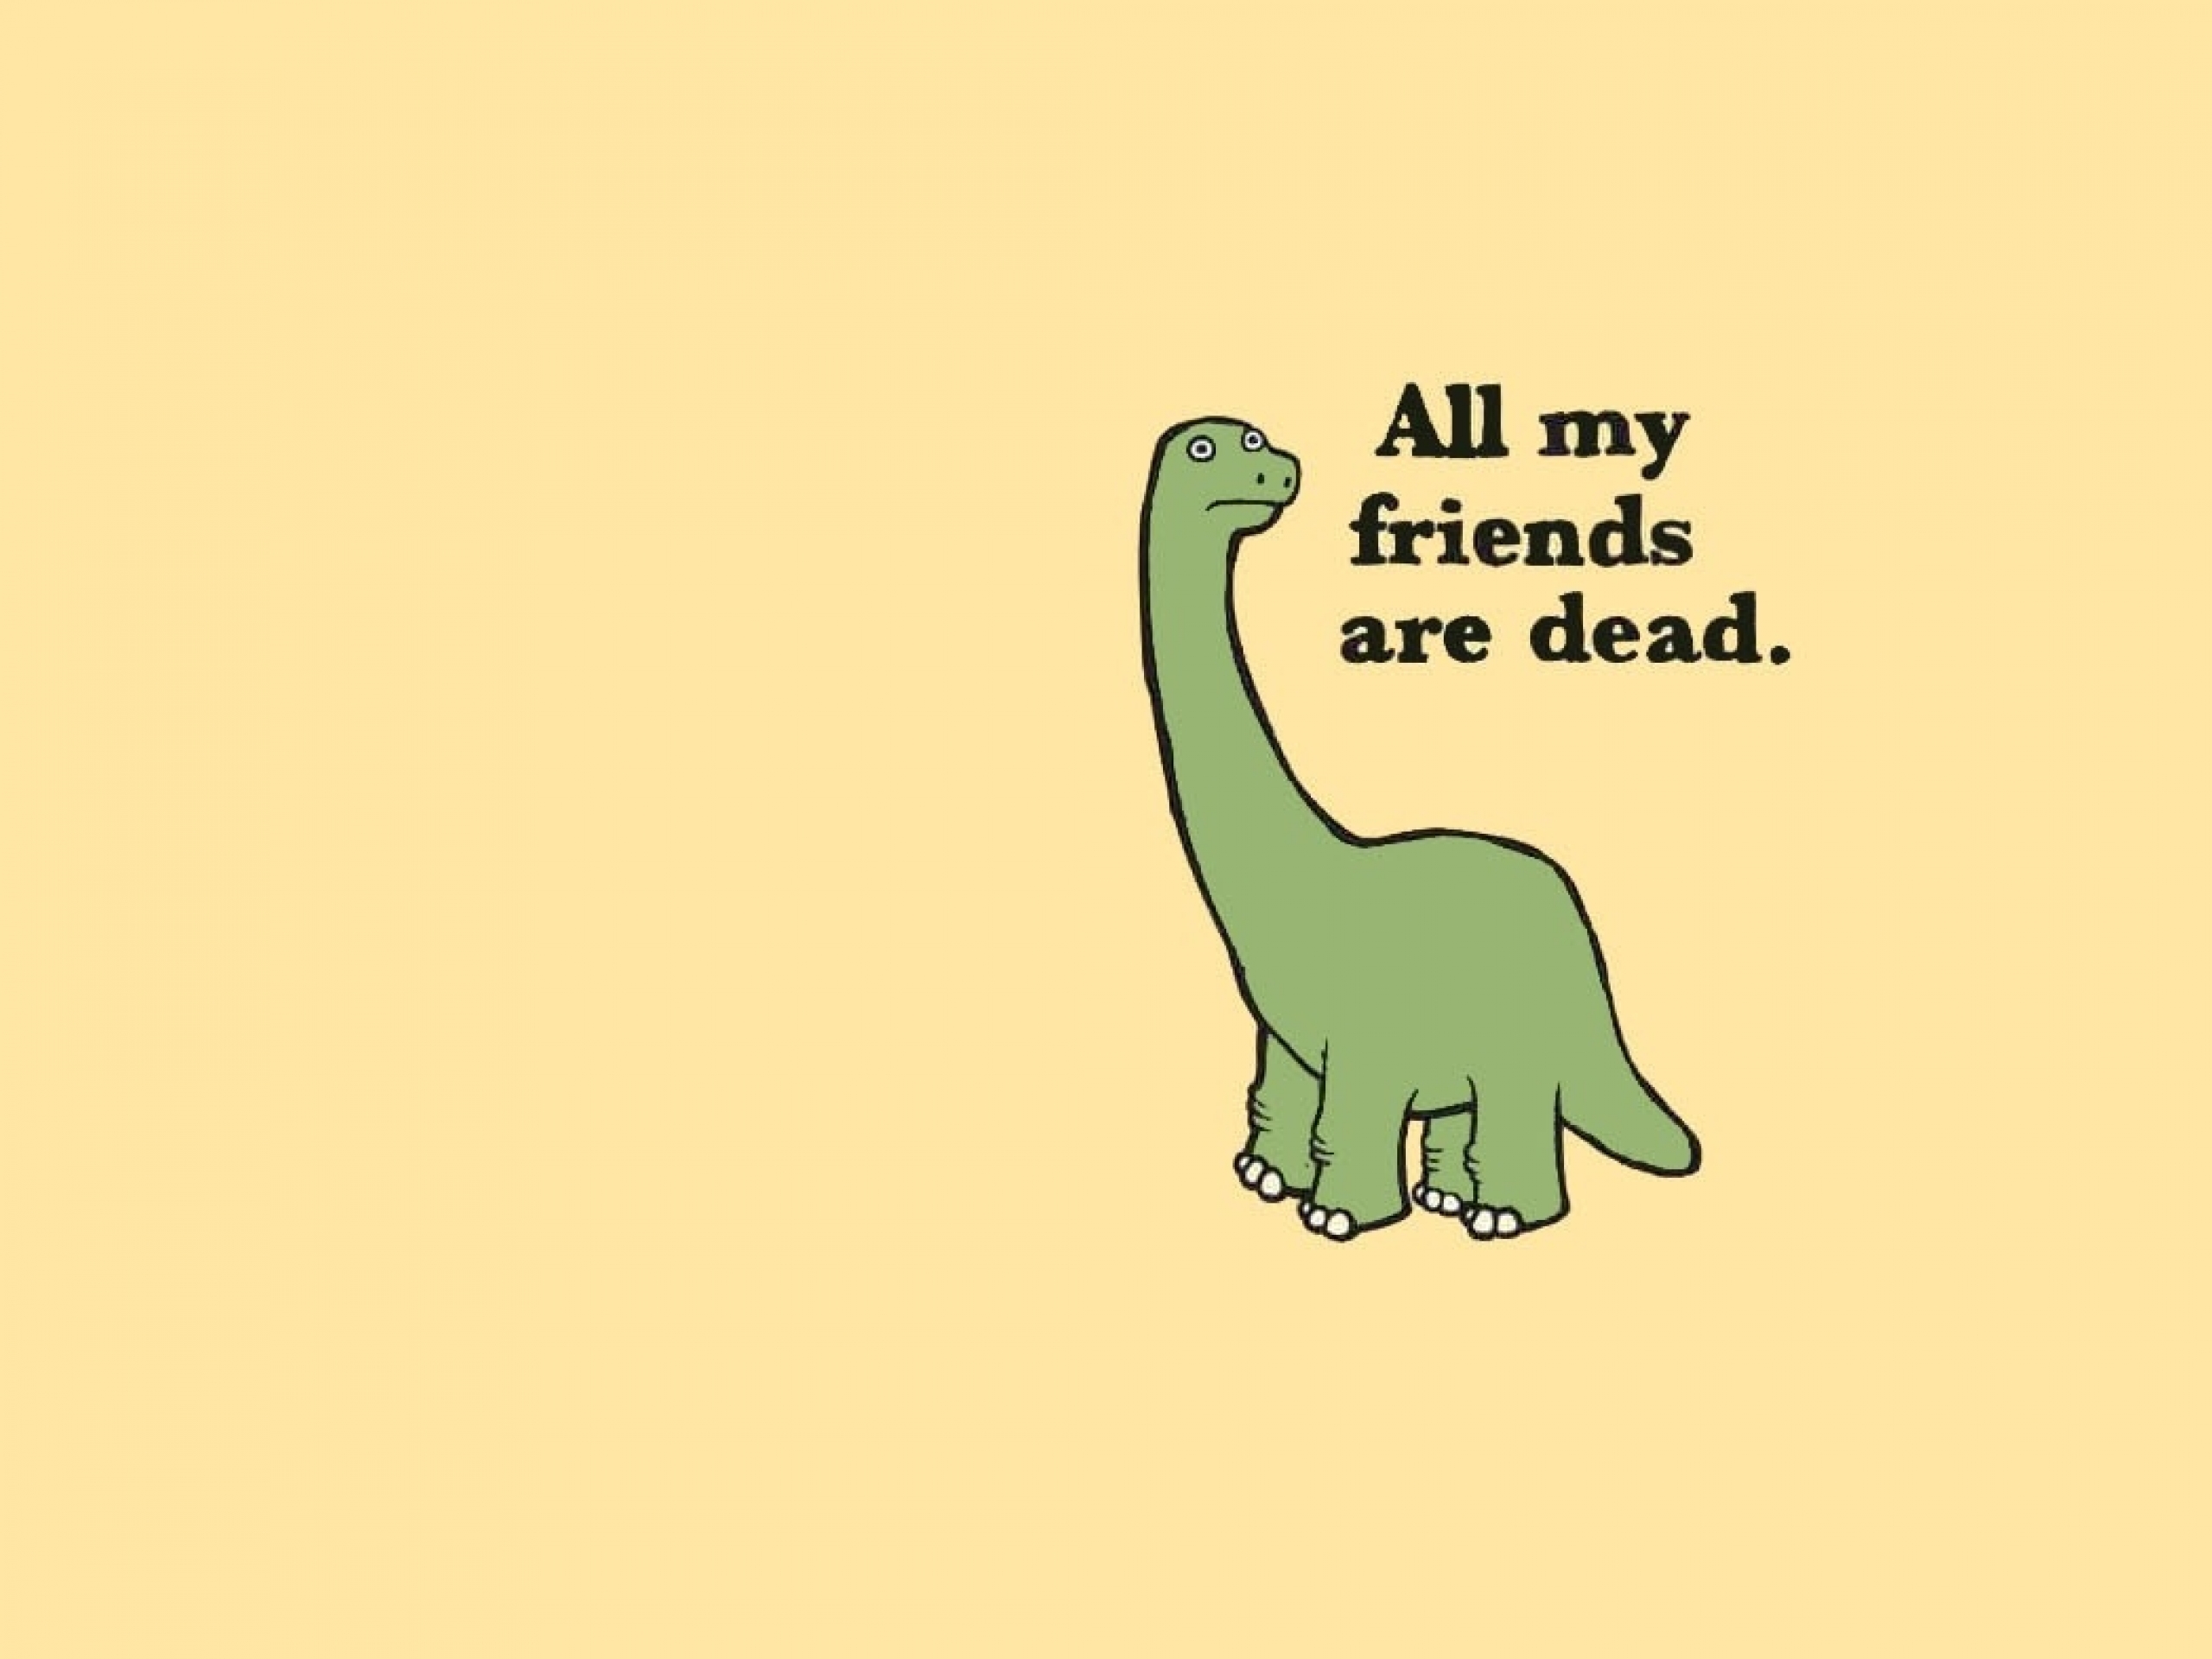 Text Dinosaurs Quotes Funny - All Friends Are Dead - HD Wallpaper 